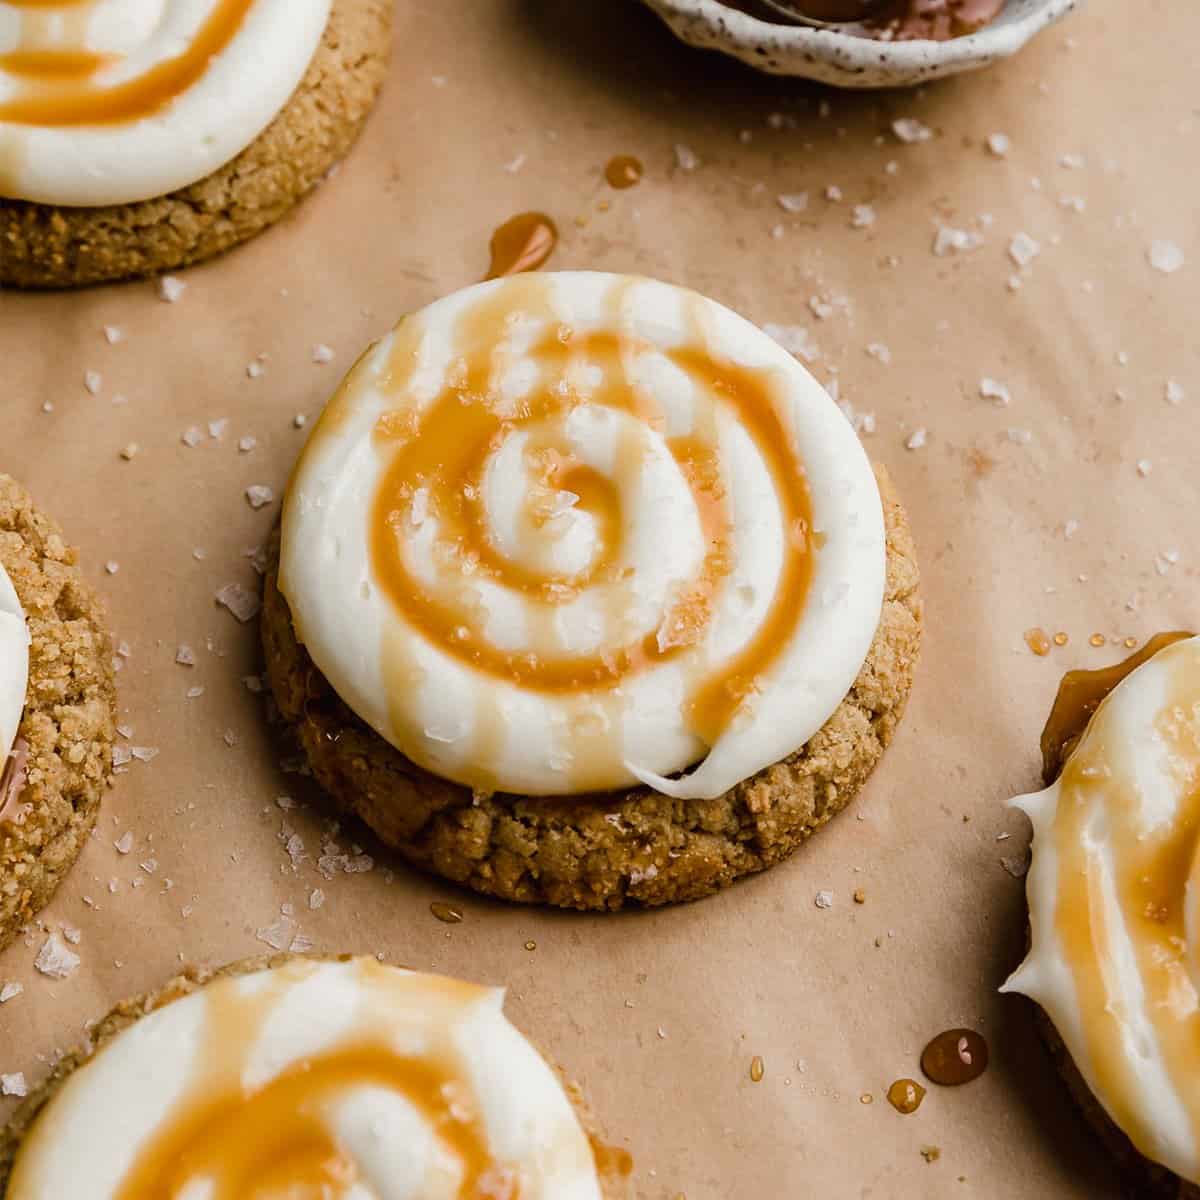 A Salted Caramel Cheesecake Cookie on a tan parchment paper, cookie is topped with caramel and white frosting.